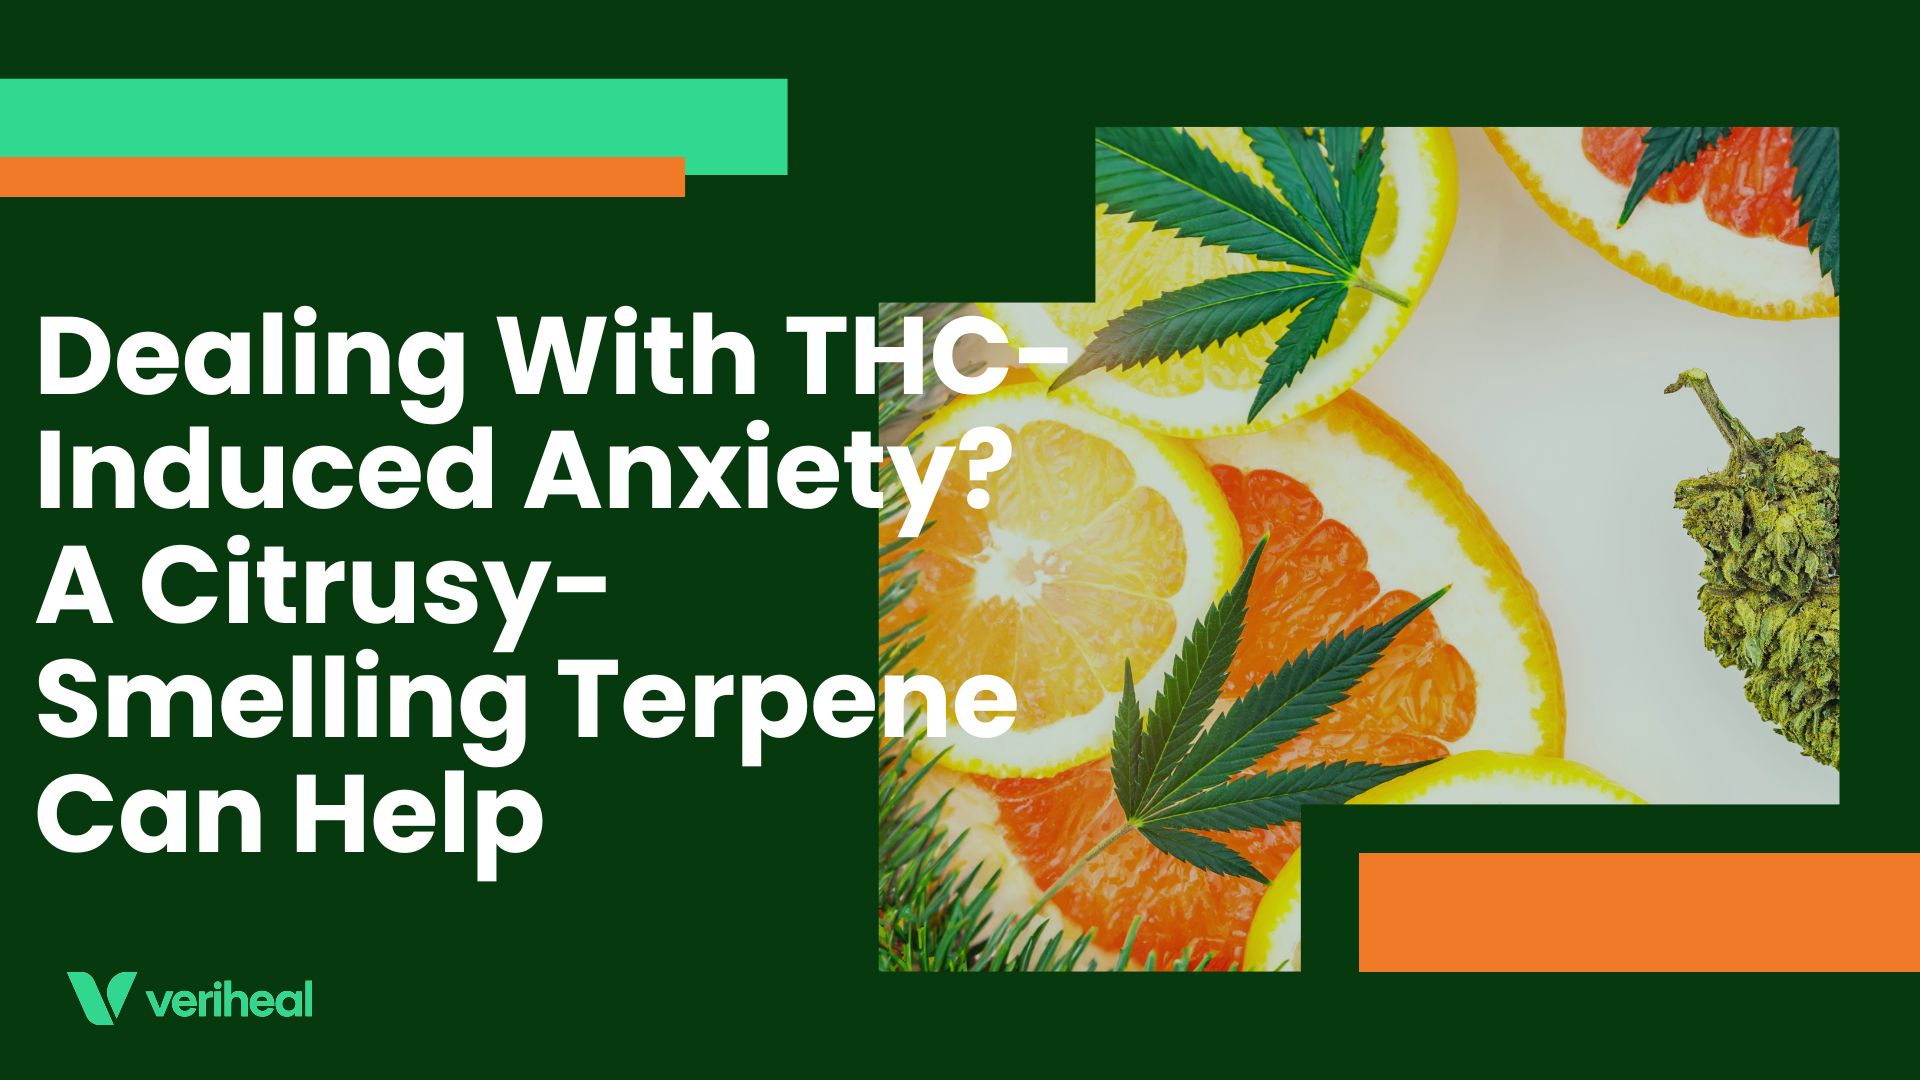 Dealing With THC-Induced Anxiety? A Citrusy-Smelling Terpene Can Help